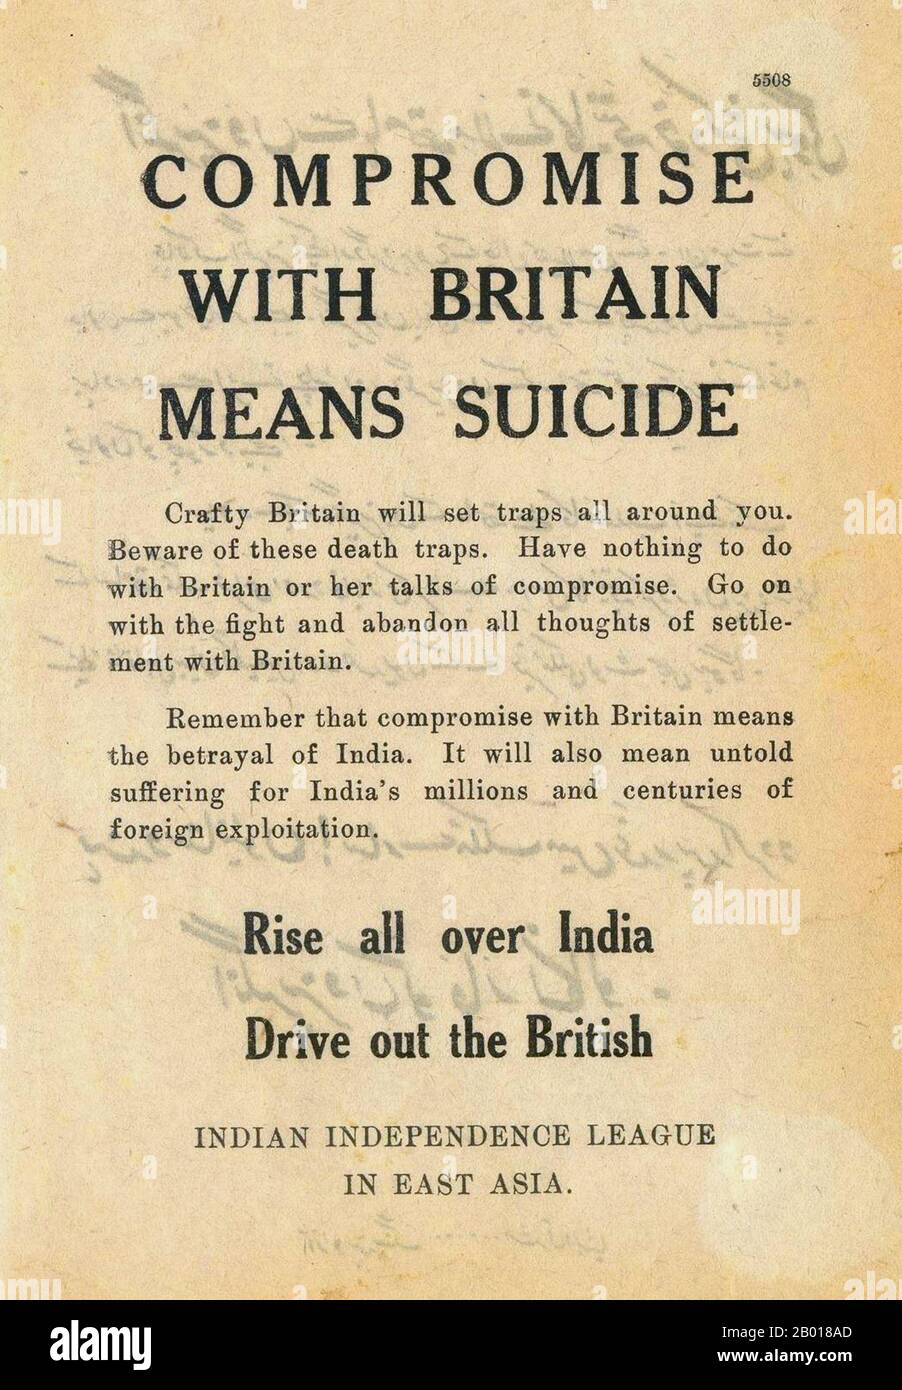 India: 'Compromise with Britain means suicide'. Indian Independence League propaganda leaflet, English on one side, Urdu on the reverse. c. 1941-1944.  China Burma India Theatre (CBI) was the name used by the United States Army for its forces operating in conjunction with British and Chinese Allied air and land forces in China, Burma, and India during World War II. Well-known US units in this theatre included the Flying Tigers, transport and bomber units flying the Hump, and the 1st Air Commando Group, the engineers who built Ledo Road. Stock Photo